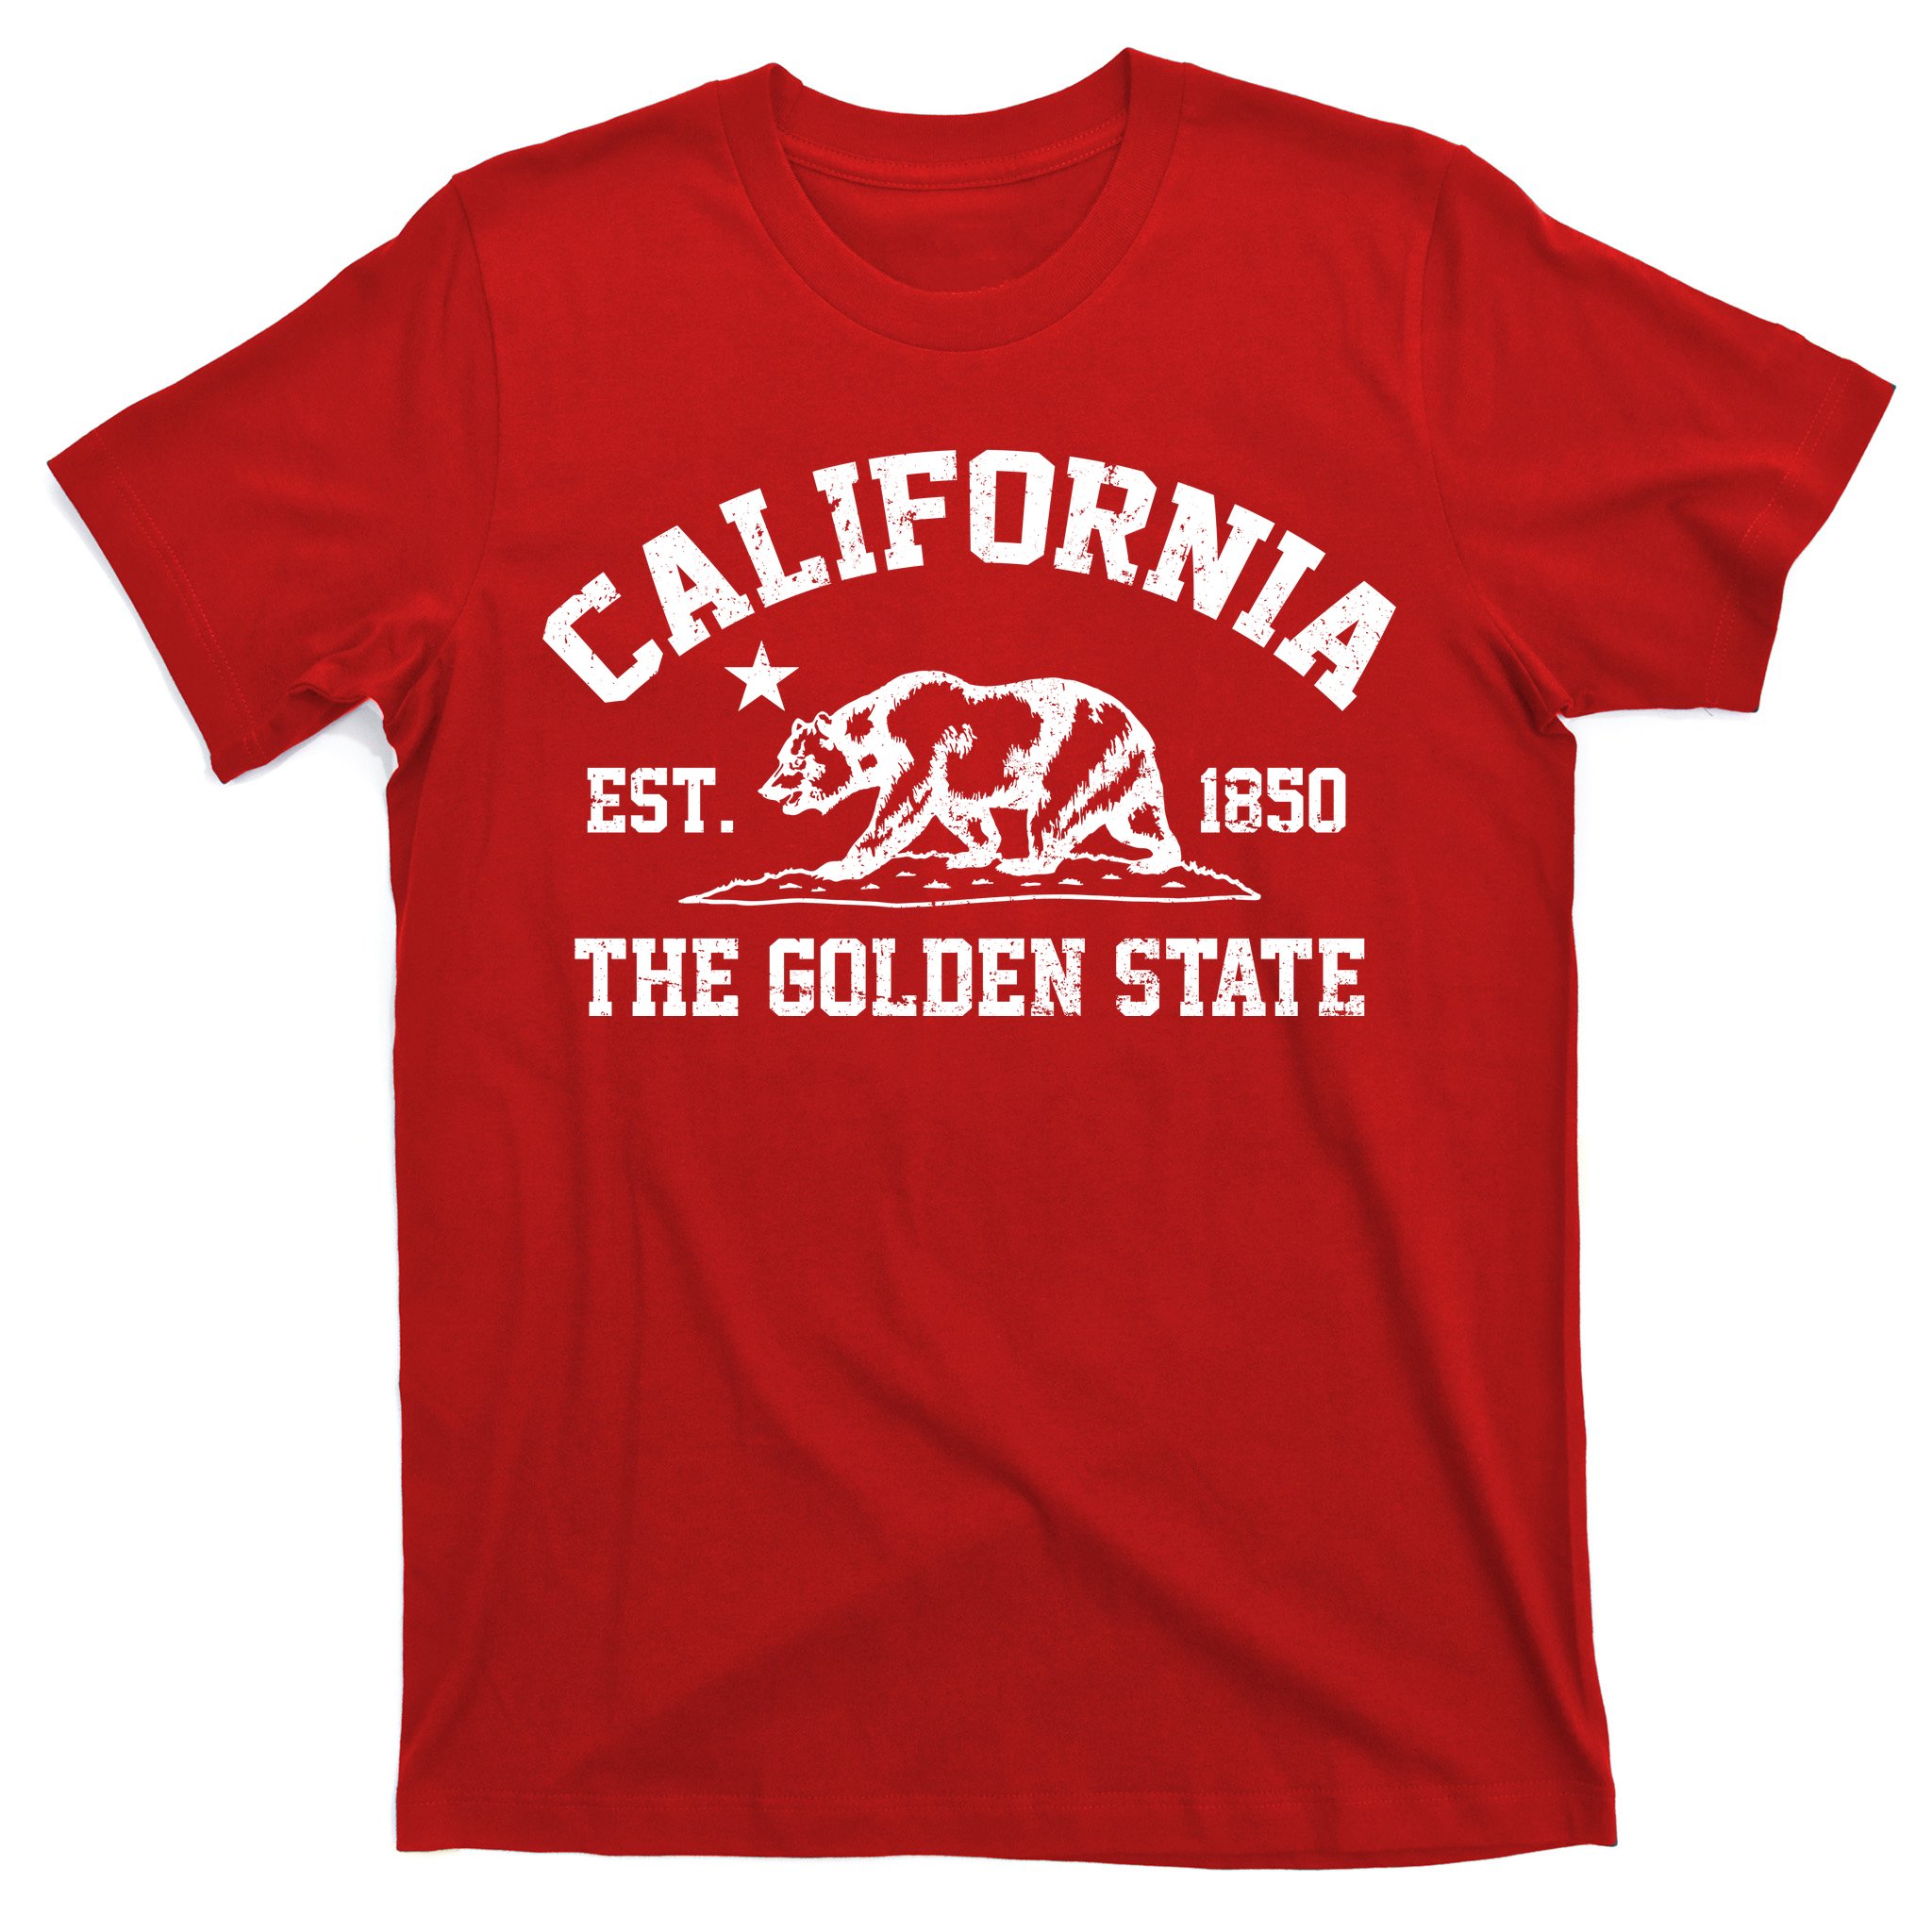 Big and Tall Sizes California Bear Est 1850 T-Shirts in Regular 